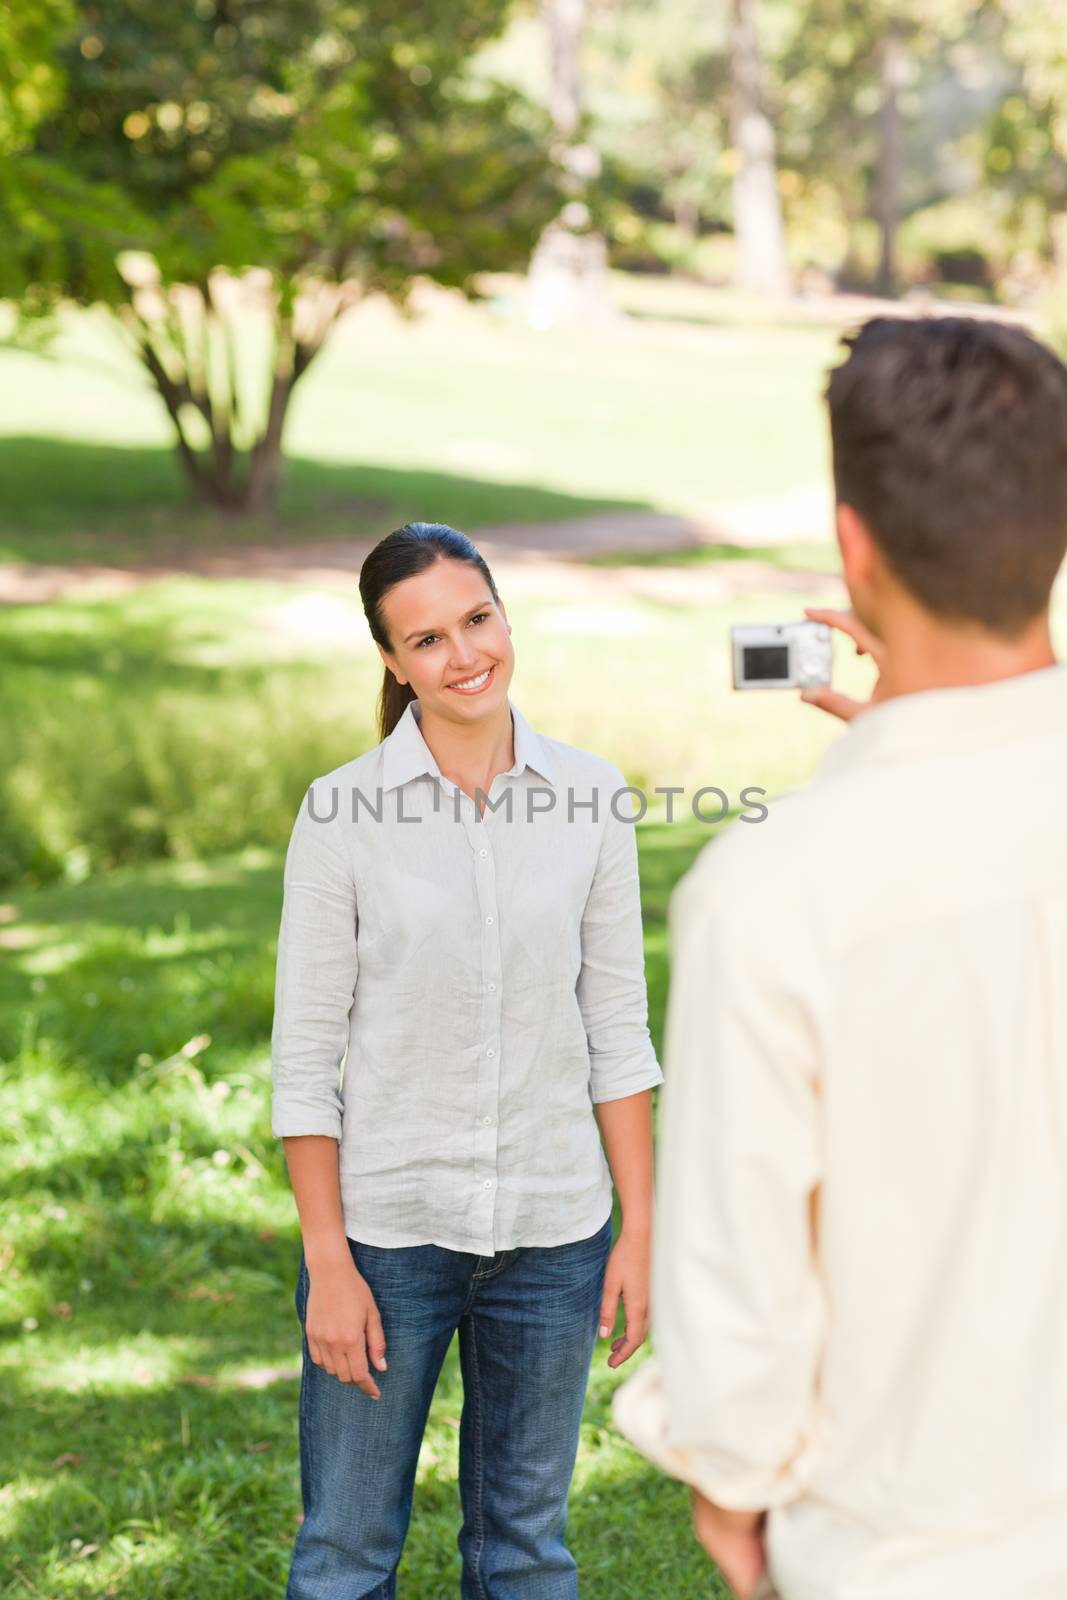 Man taking a photo of his girlfriend in a park